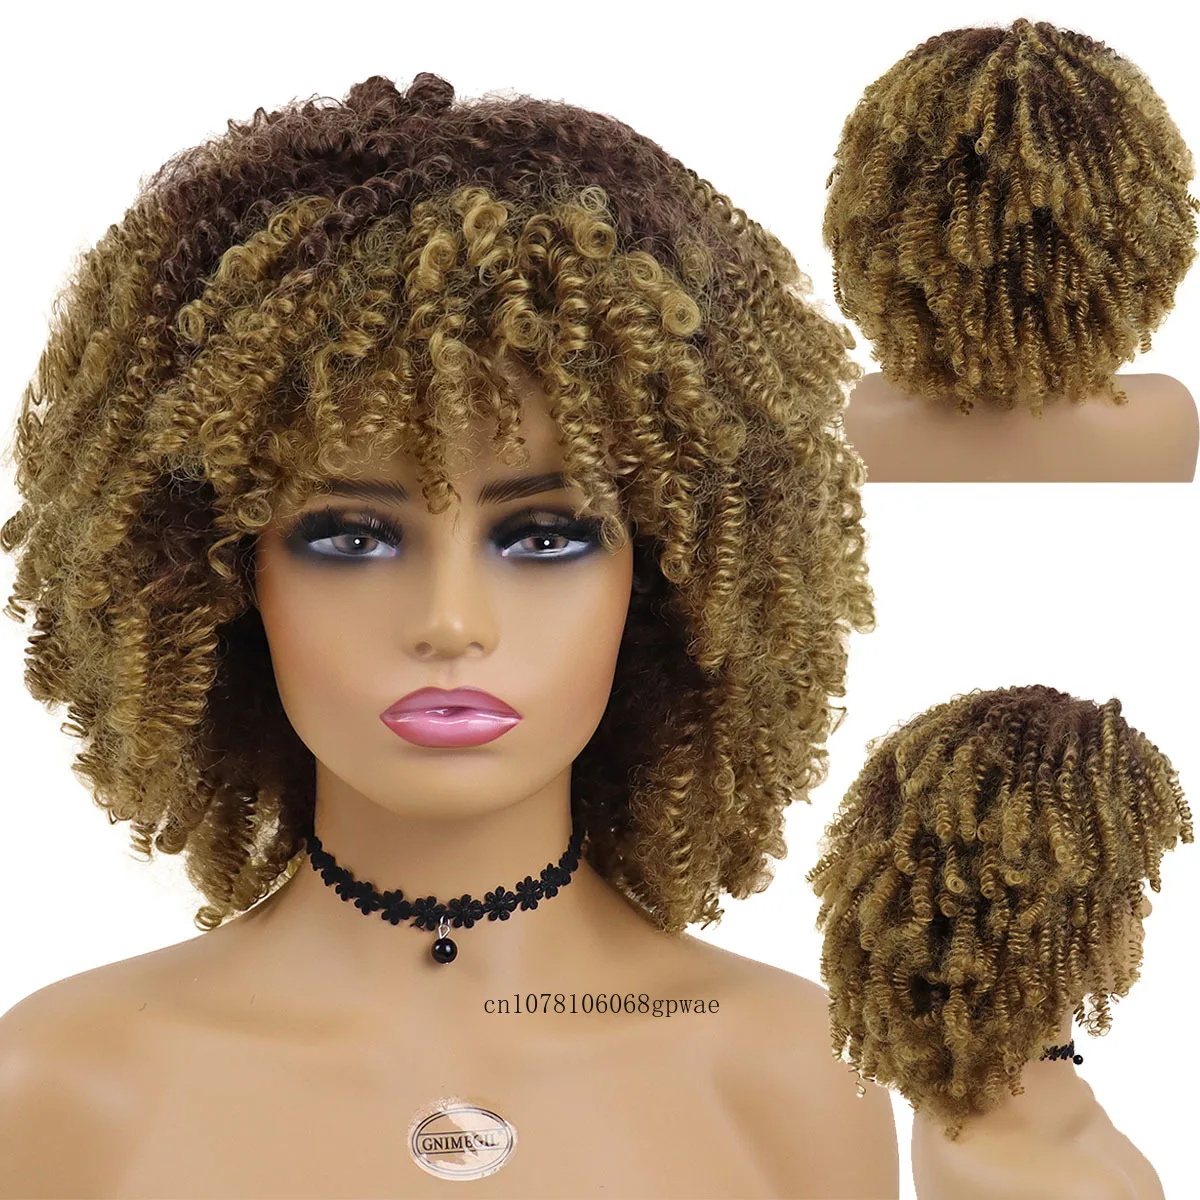 

Short Afro Kinky Curly Wigs for Women Ombre Blonde Wig with Bangs Natural Fluffy Elastic Hairstyle Afro Wig Ladies Cosplay Party